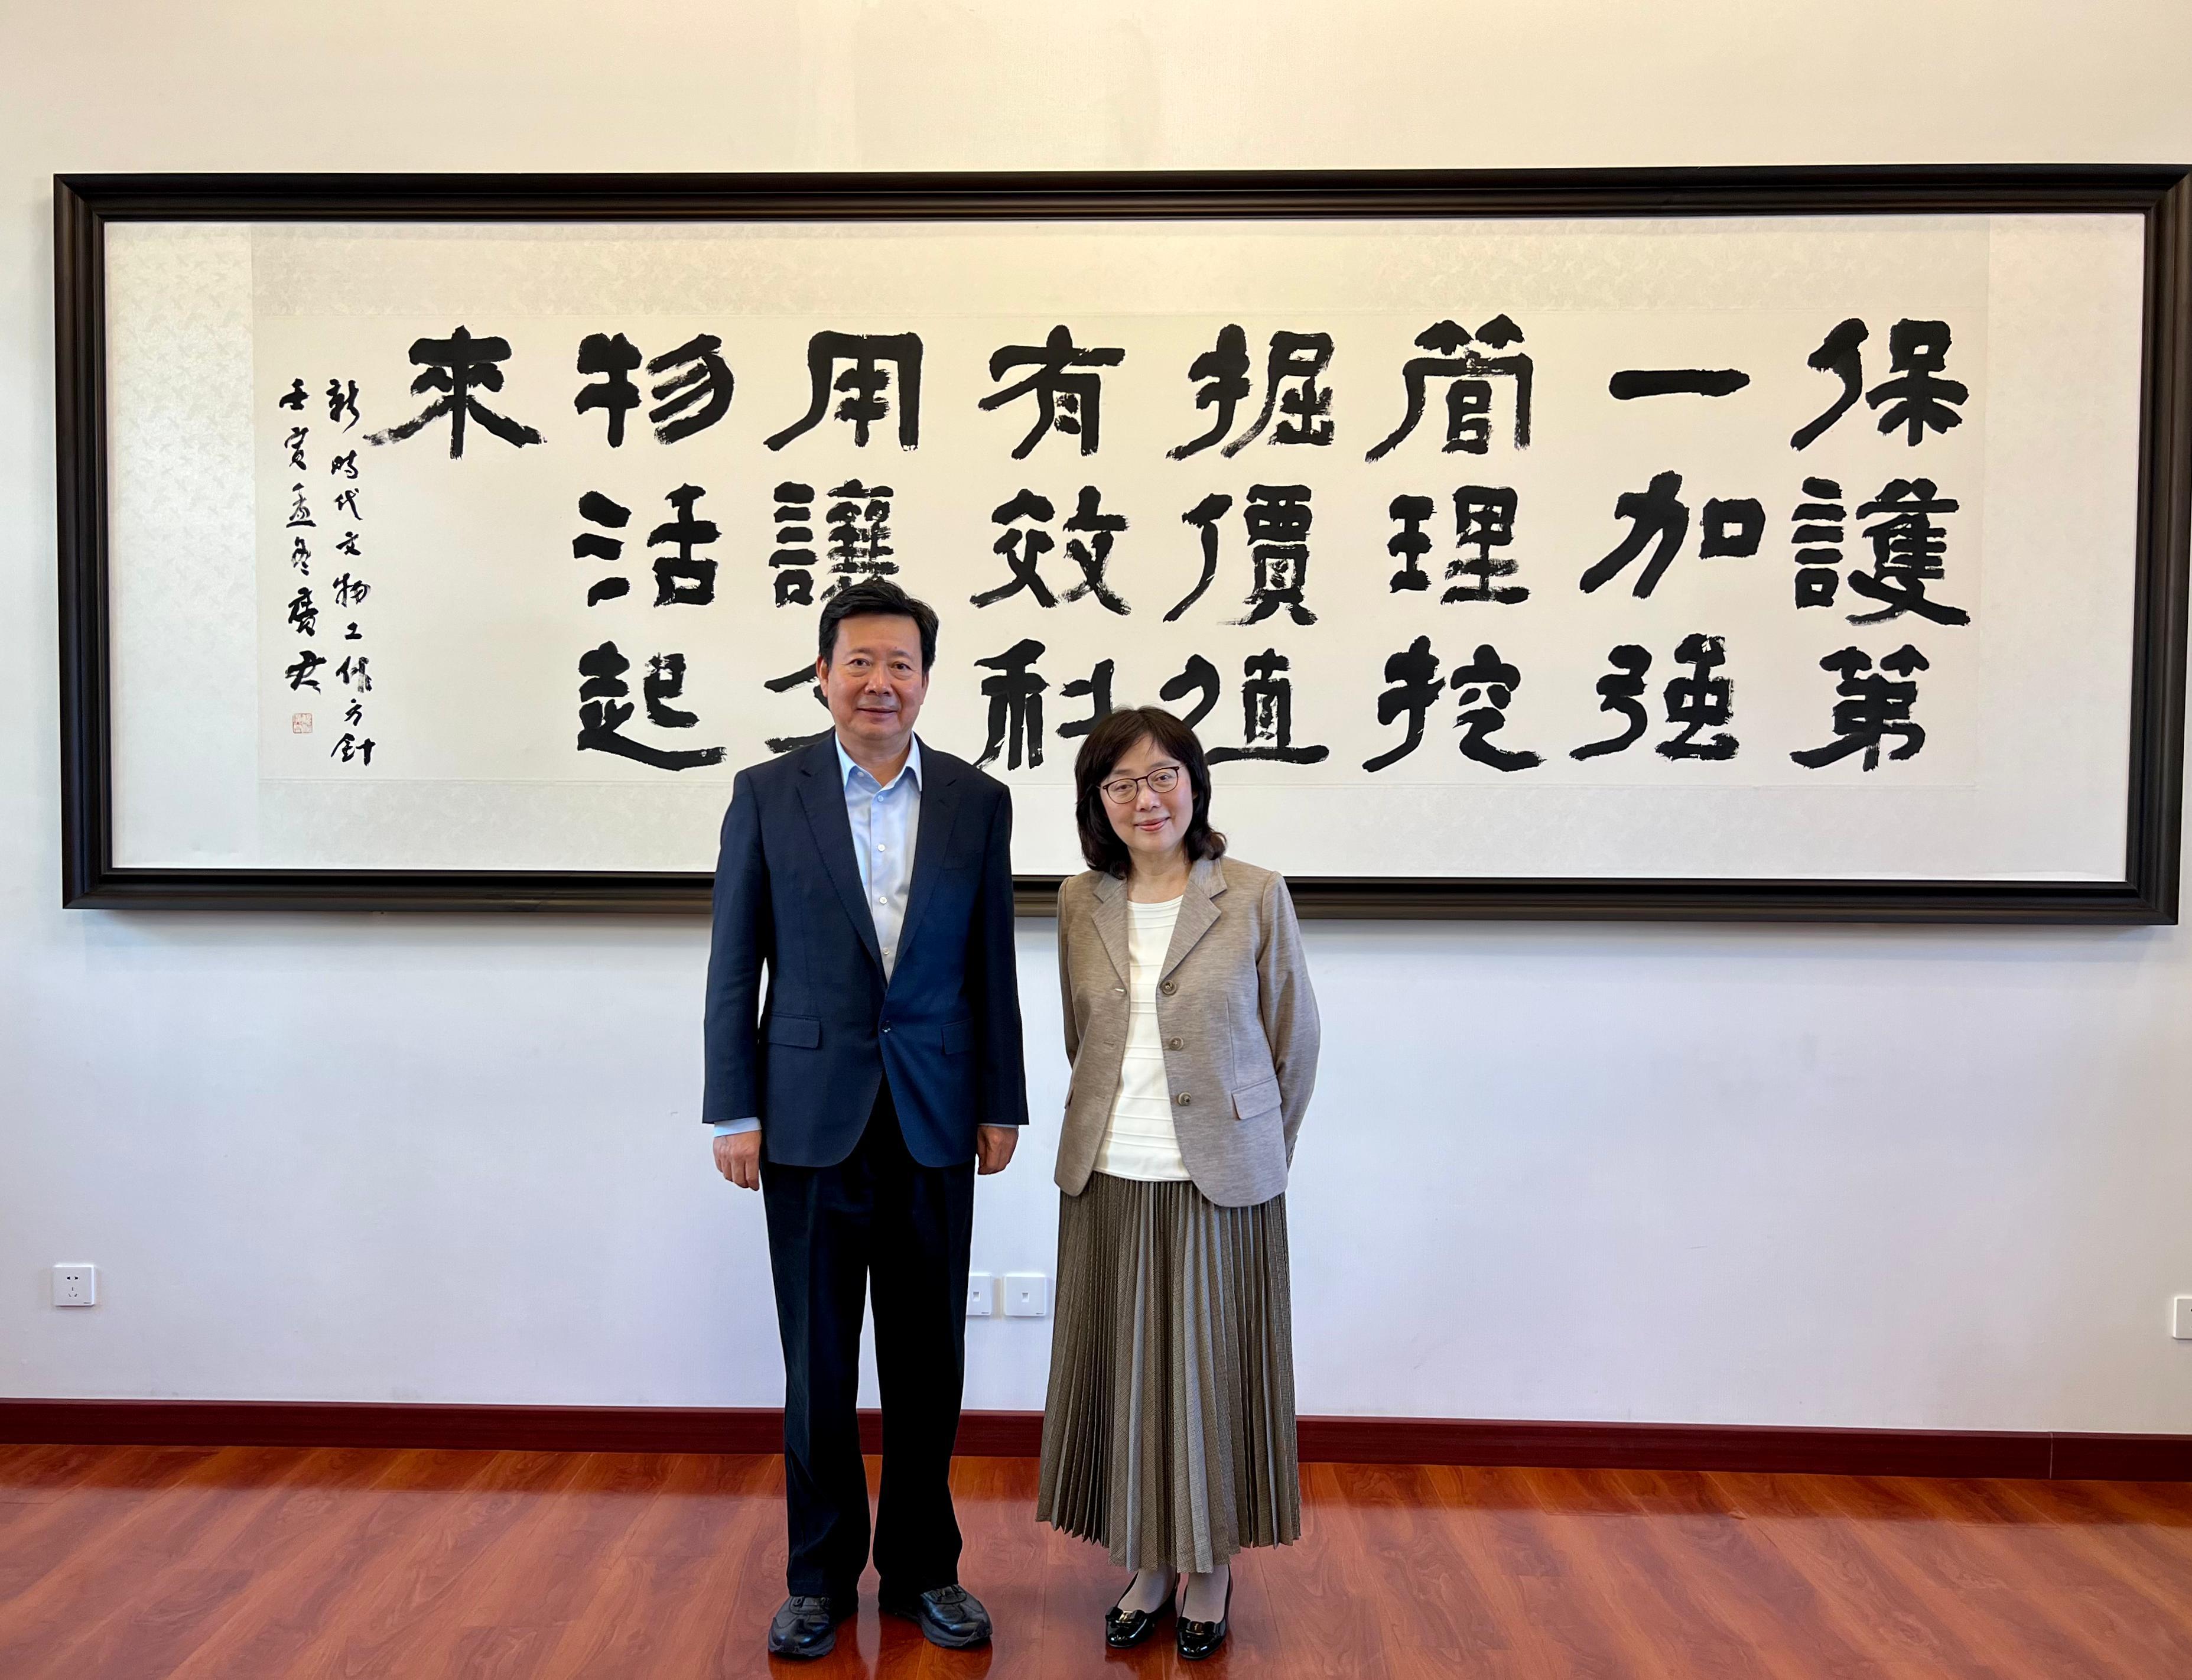 The Secretary for Development, Ms Bernadette Linn (right), met with the Vice Minister of Culture and Tourism and Administrator of the National Cultural Heritage Administration, Mr Li Qun (left), in Beijing today (November 9).
